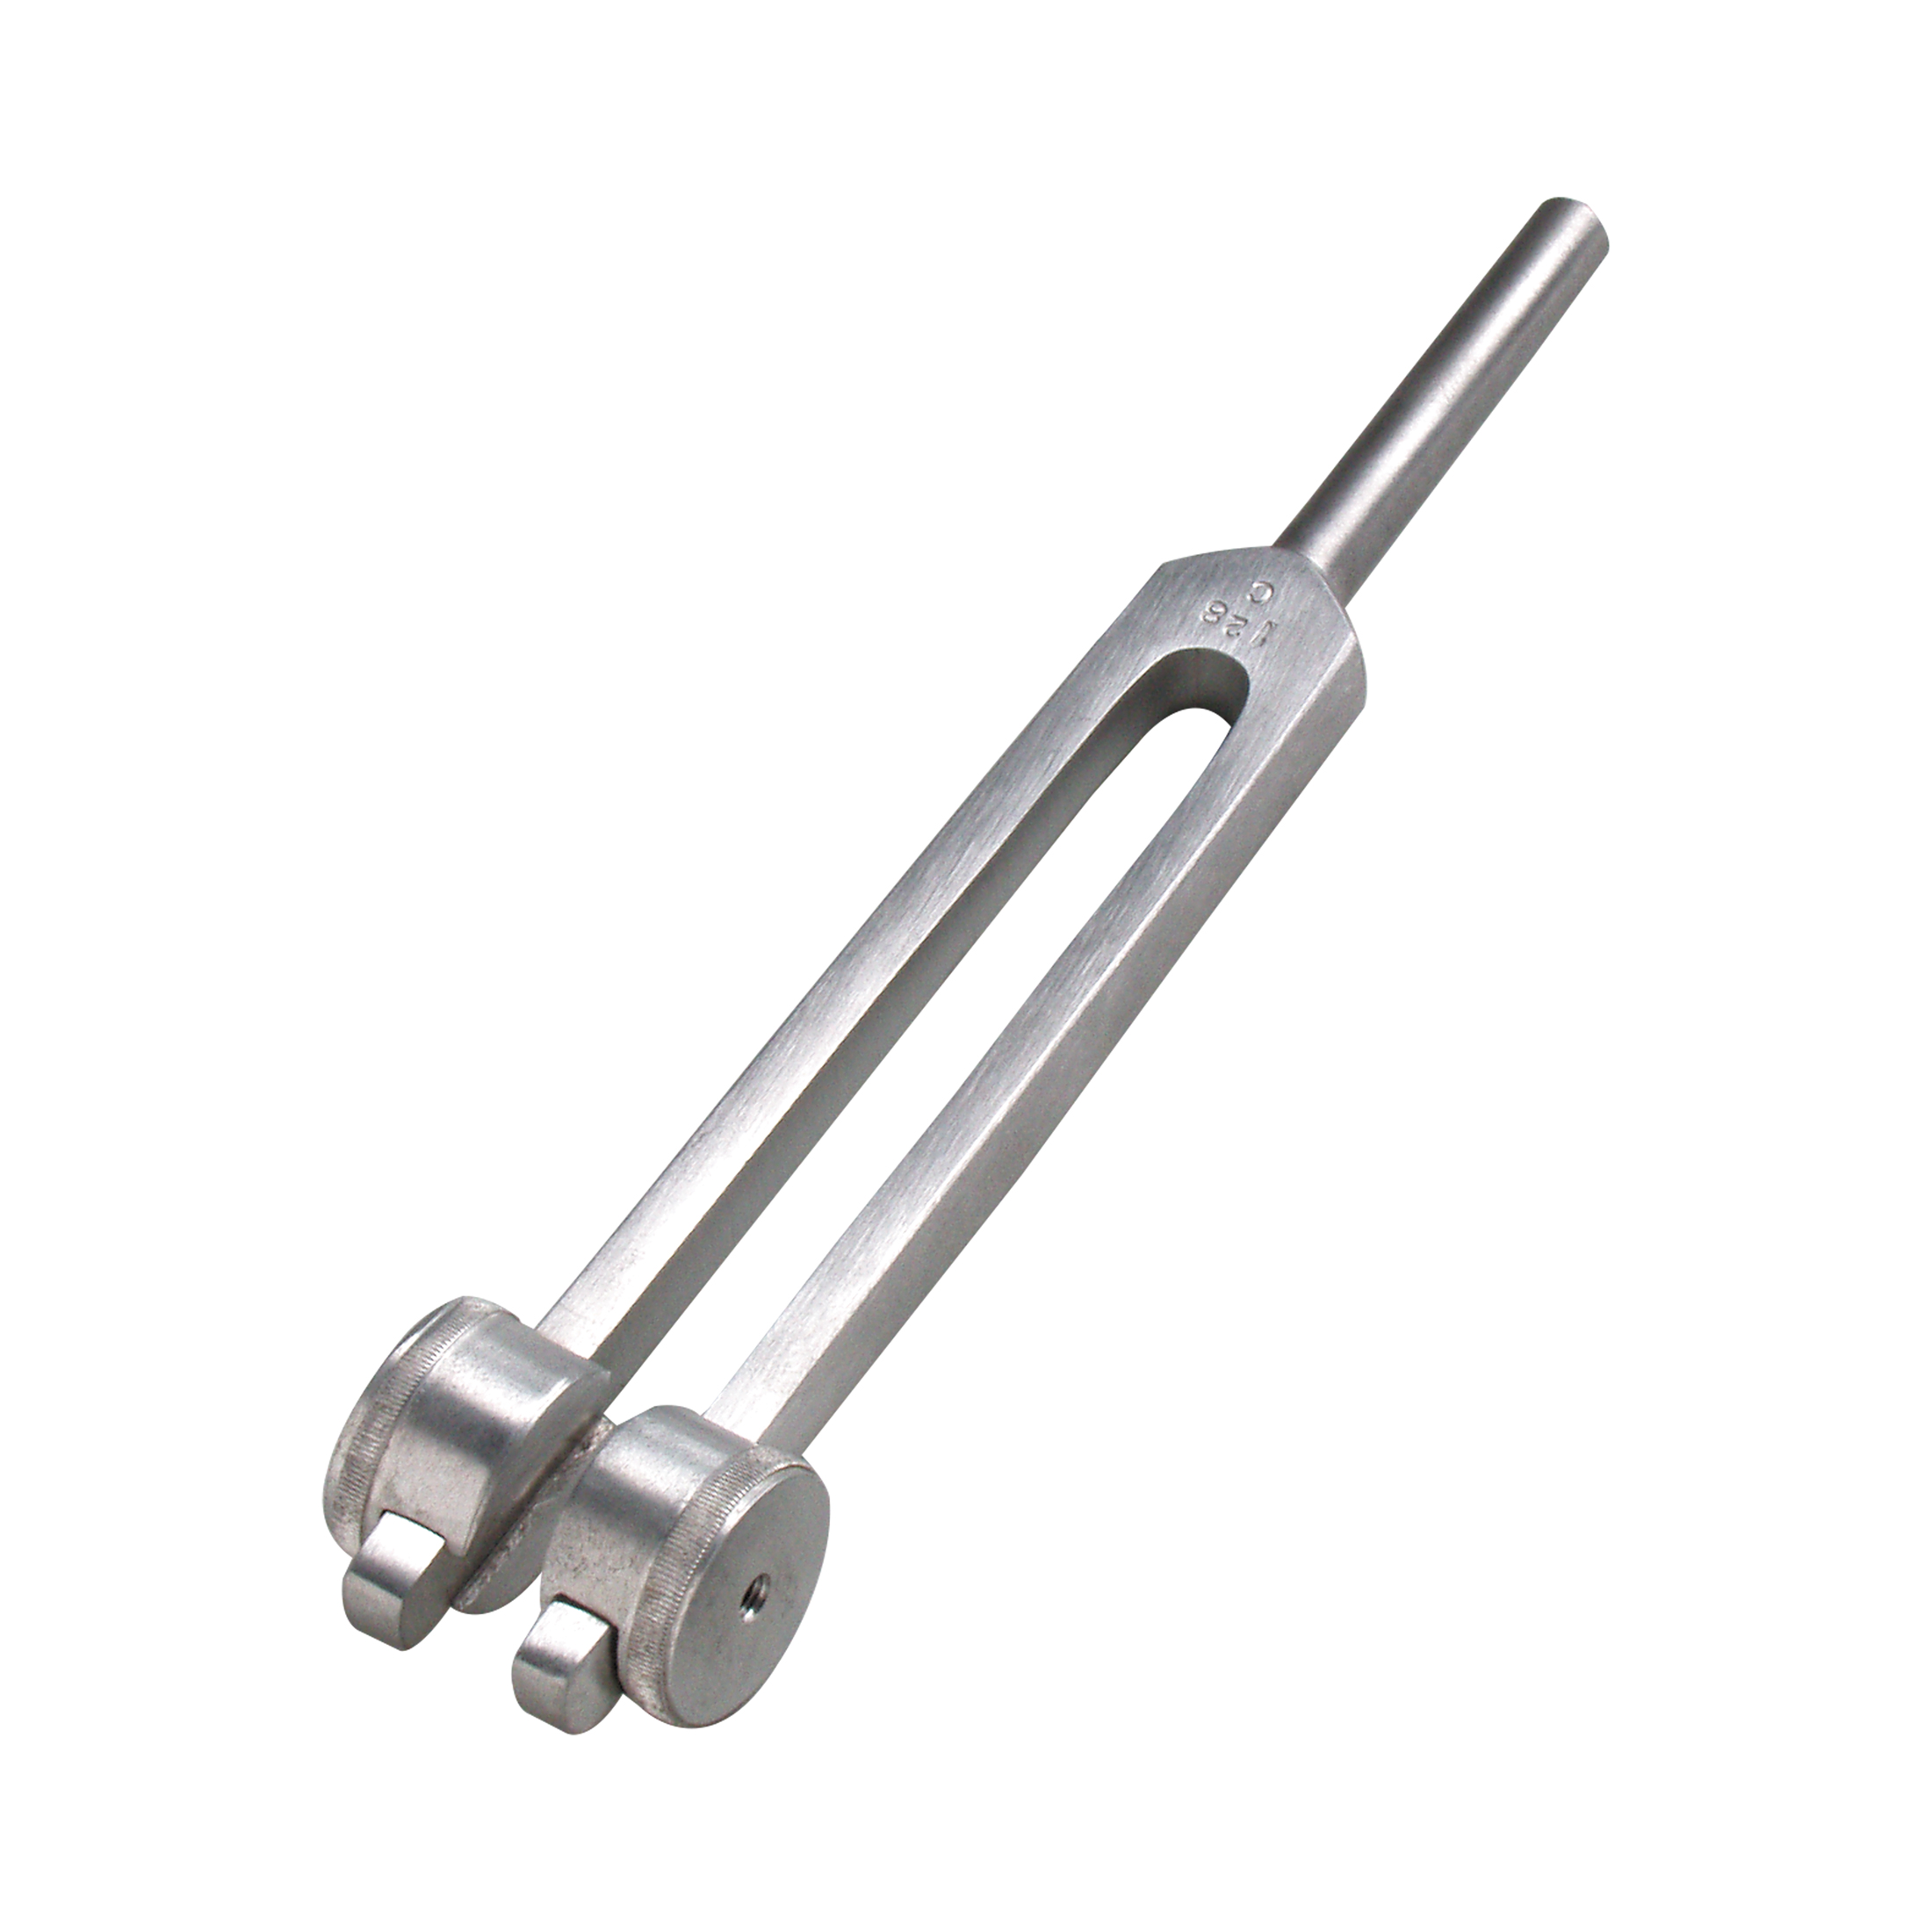 Tuning Forks Products, Supplies and Equipment